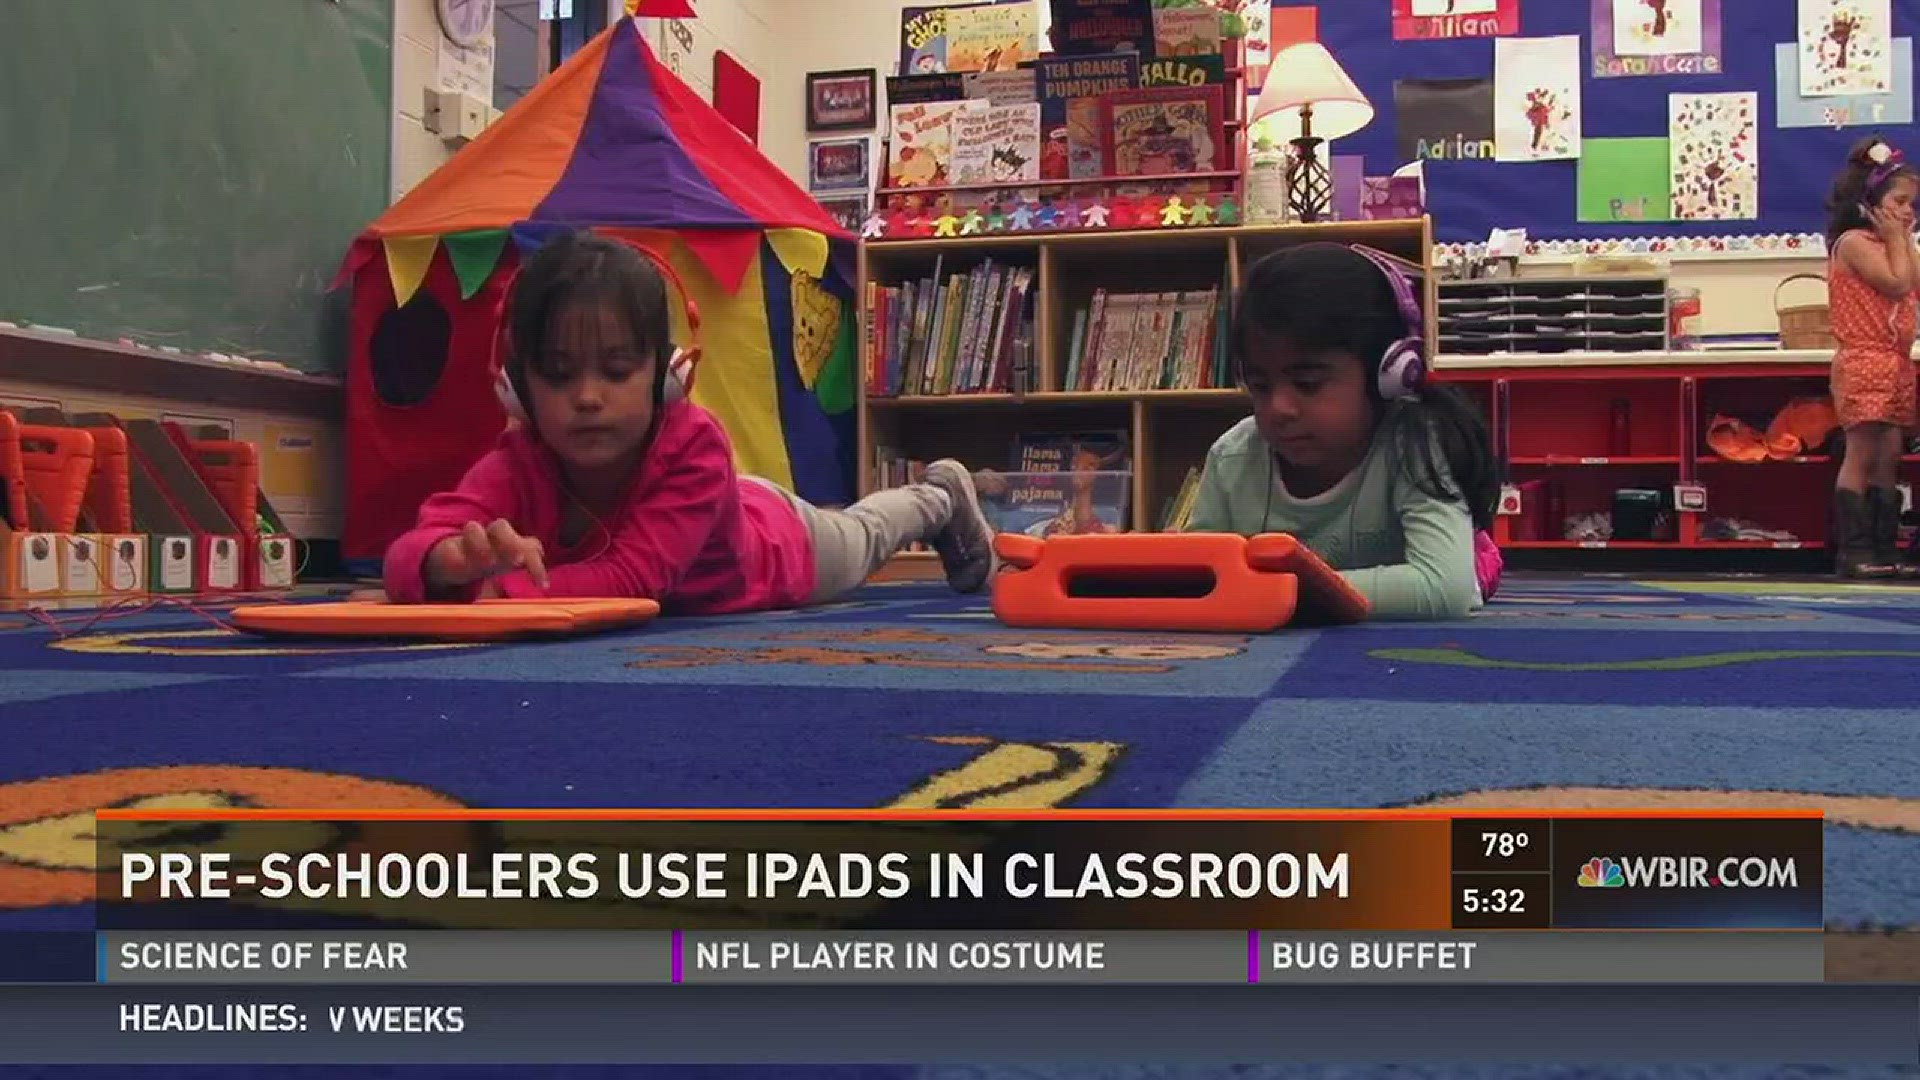 Oct. 27, 2016: At Maryville City Schools, students as young as Pre-K are already using iPads as teachers bring more technology into the classroom.